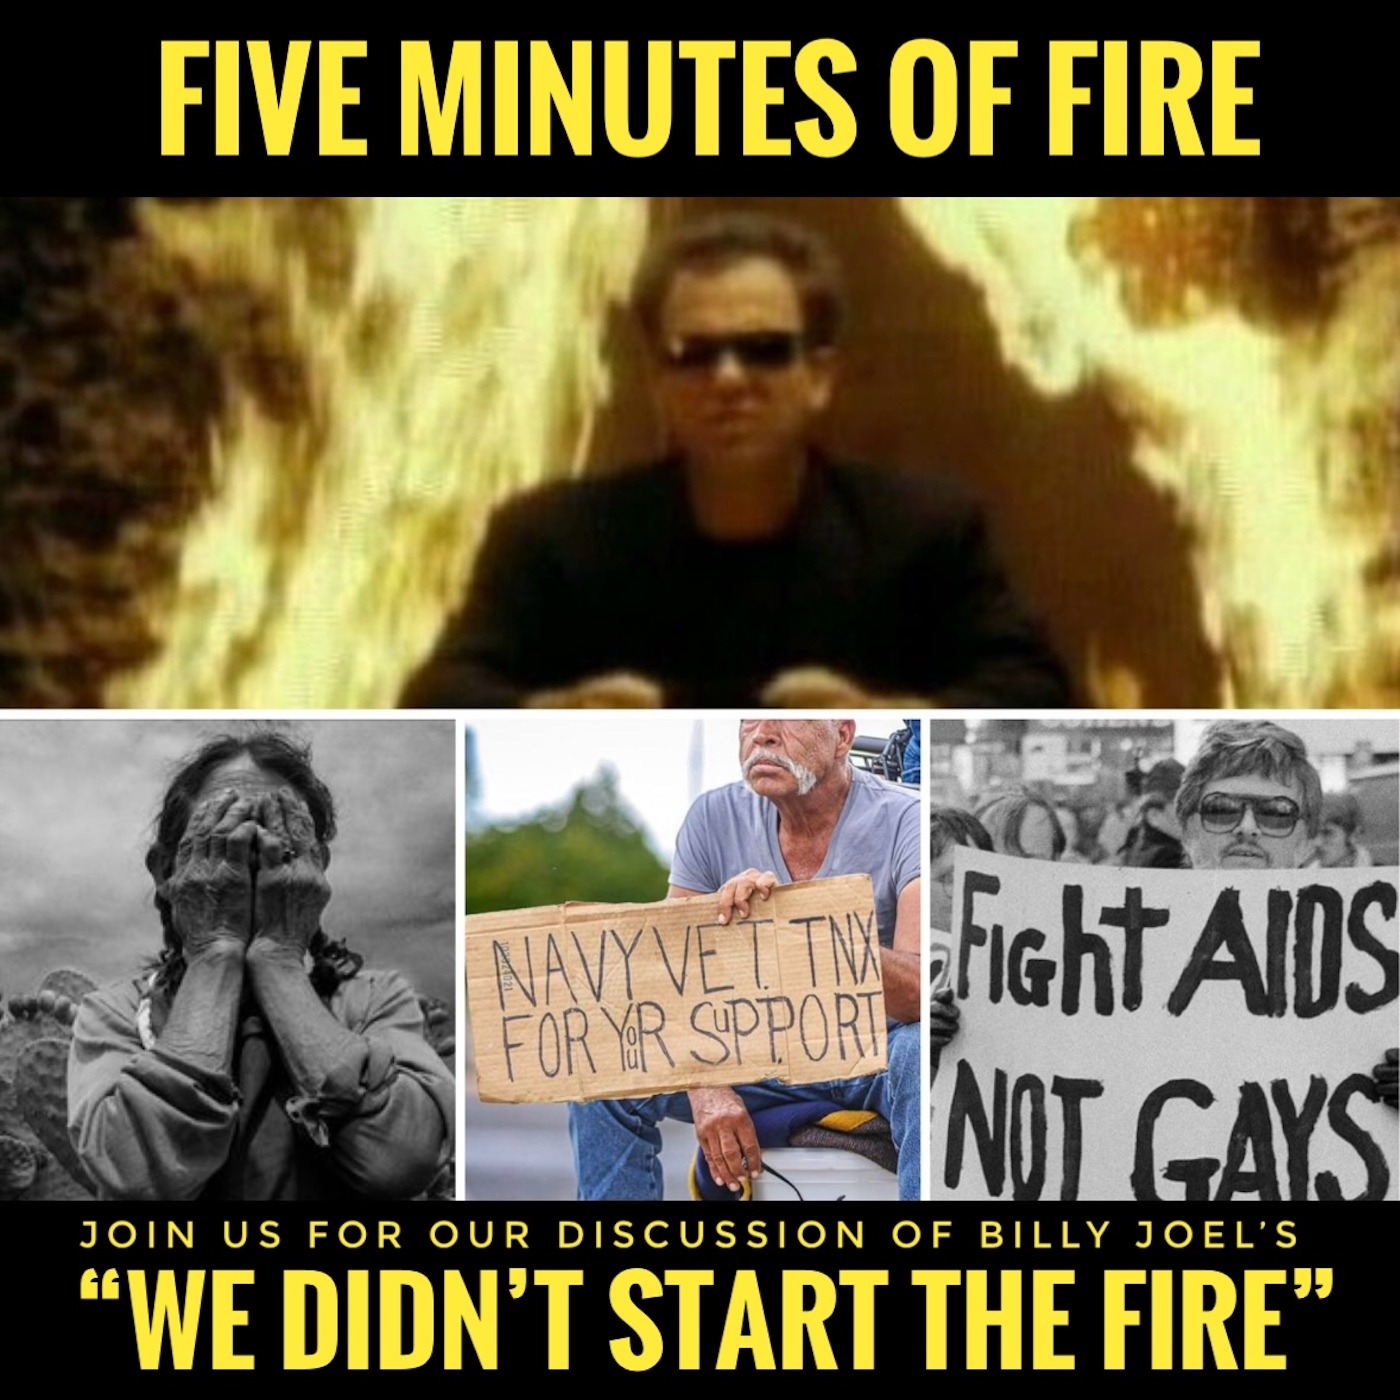 ”Five Minutes of Fire”: Foreign Debts, Homeless Vets, AIDS